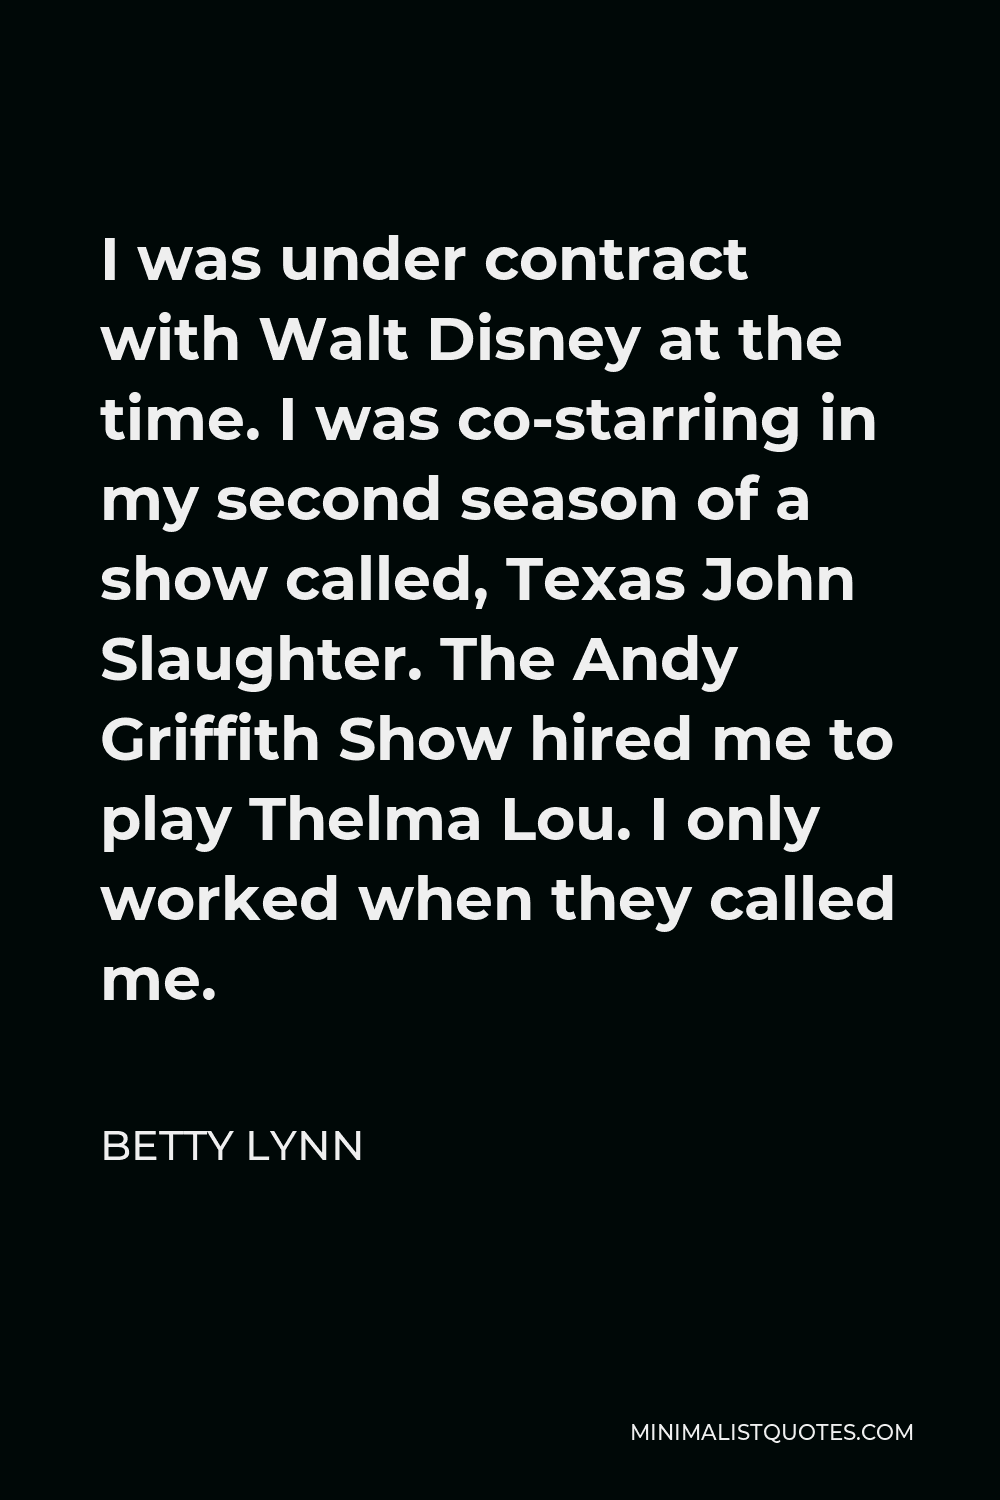 Betty Lynn Quote - I was under contract with Walt Disney at the time. I was co-starring in my second season of a show called, Texas John Slaughter. The Andy Griffith Show hired me to play Thelma Lou. I only worked when they called me.